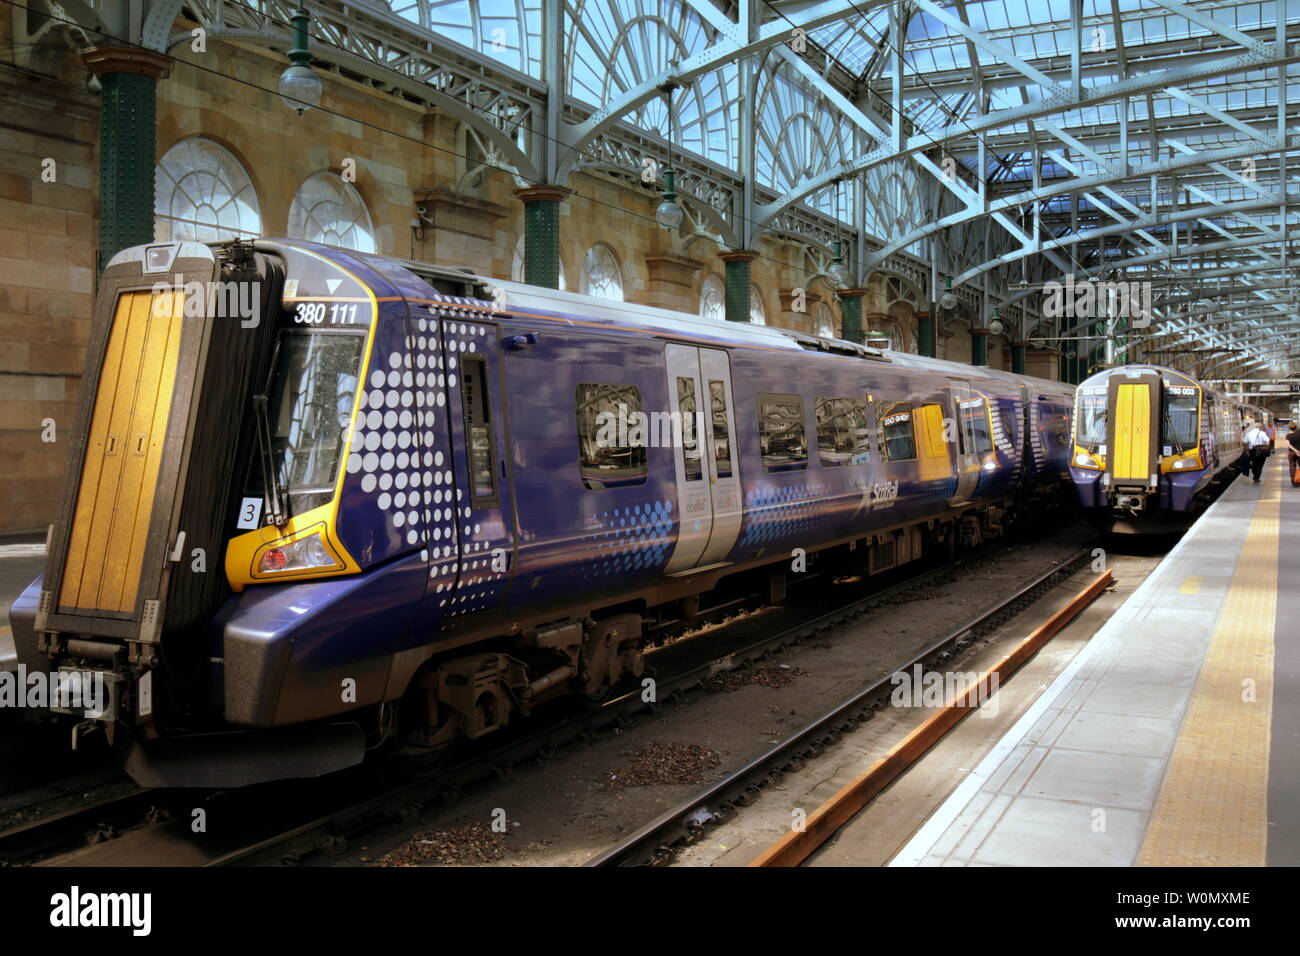 Glasgow, Scotland, UK 27th June, 2019. Scotrail misery continues with another day of cancellations and delays due to broken down trains, staff shortages and now an overhead line fault in the city centre. Credit: Gerard Ferry/ Alamy Live News Stock Photo